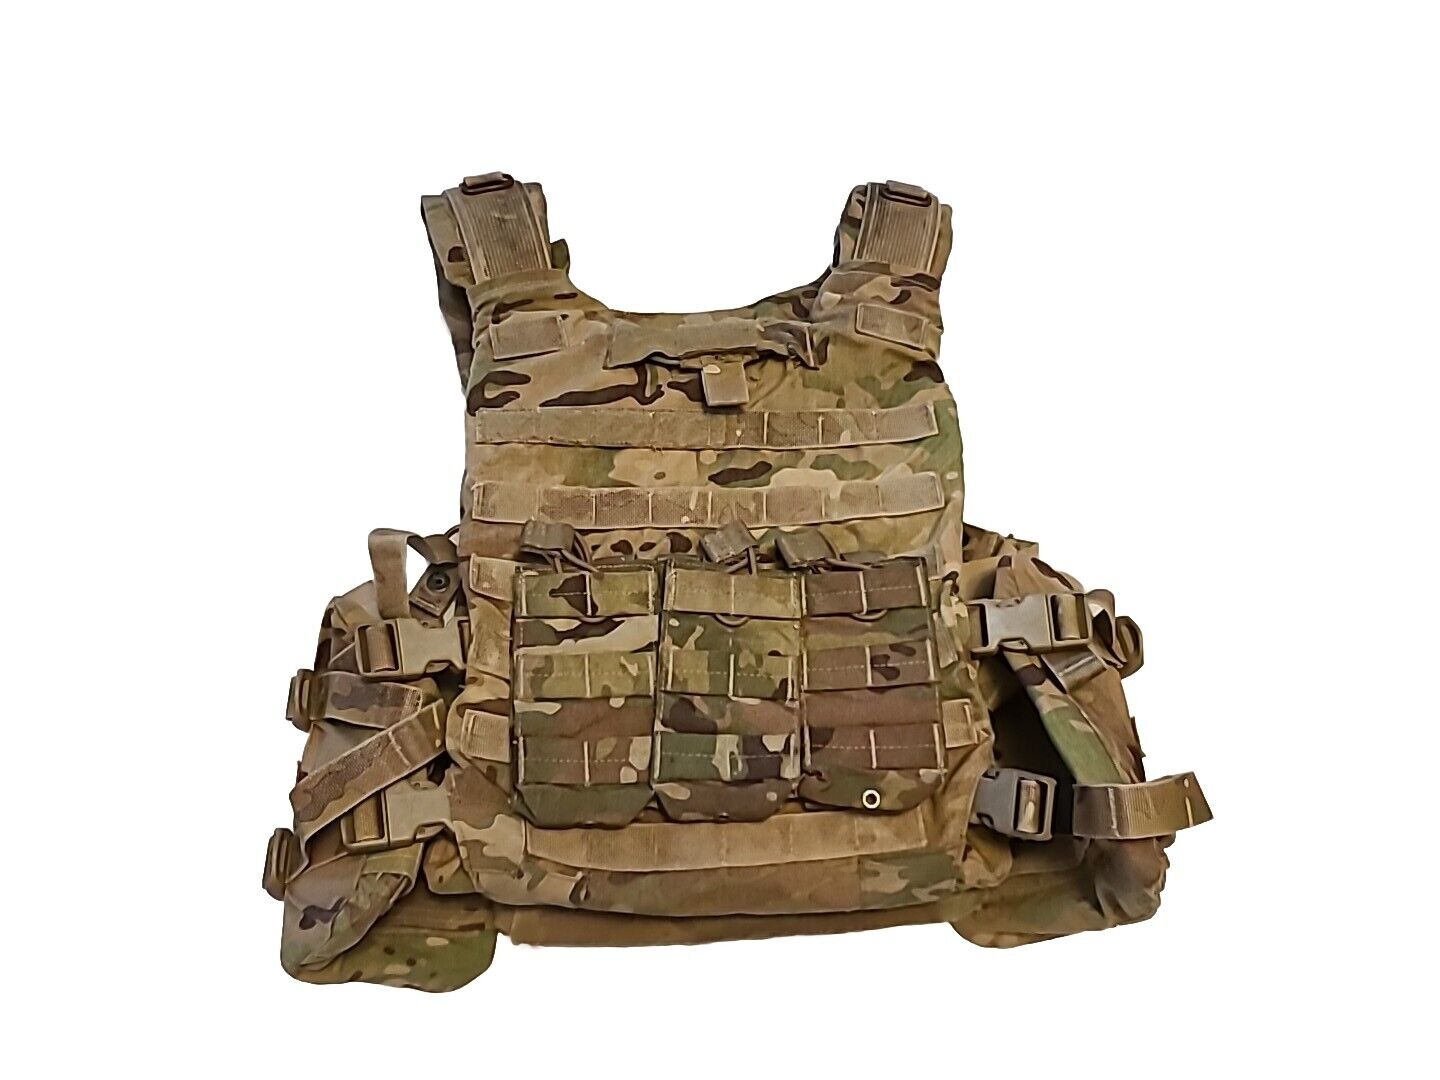 KDH MAGNUM TAC-1 OCP MULTICAM PLATE CARRIER LARGE W/ Inserts USED CLEANED HSG